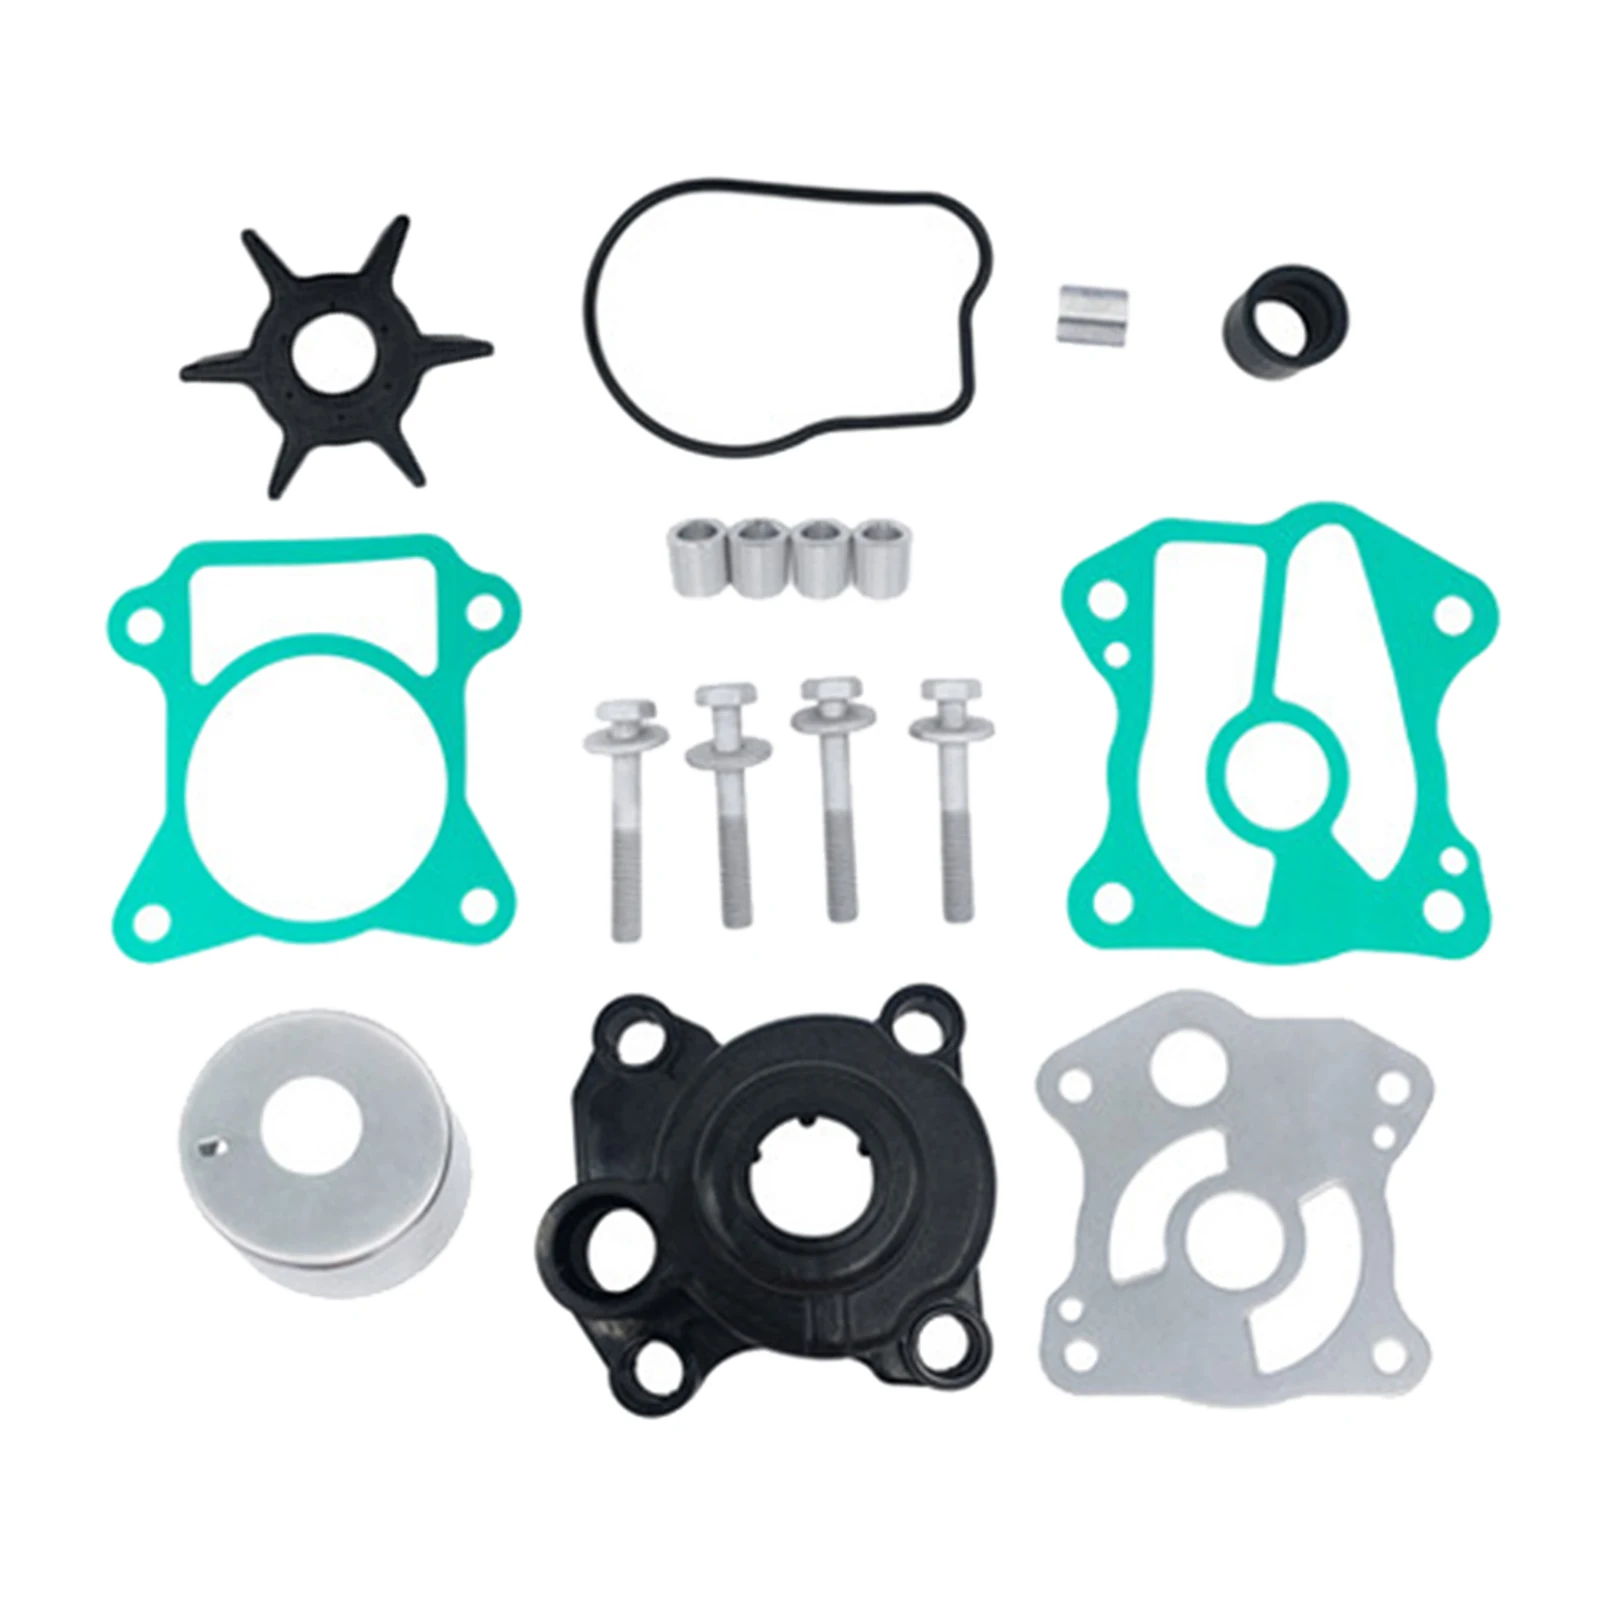 Water Pump Impeller Kit for Honda 06193-ZV5-020,06193-ZV5-010 ,06193-ZV5-000 Outboard Engines Replace